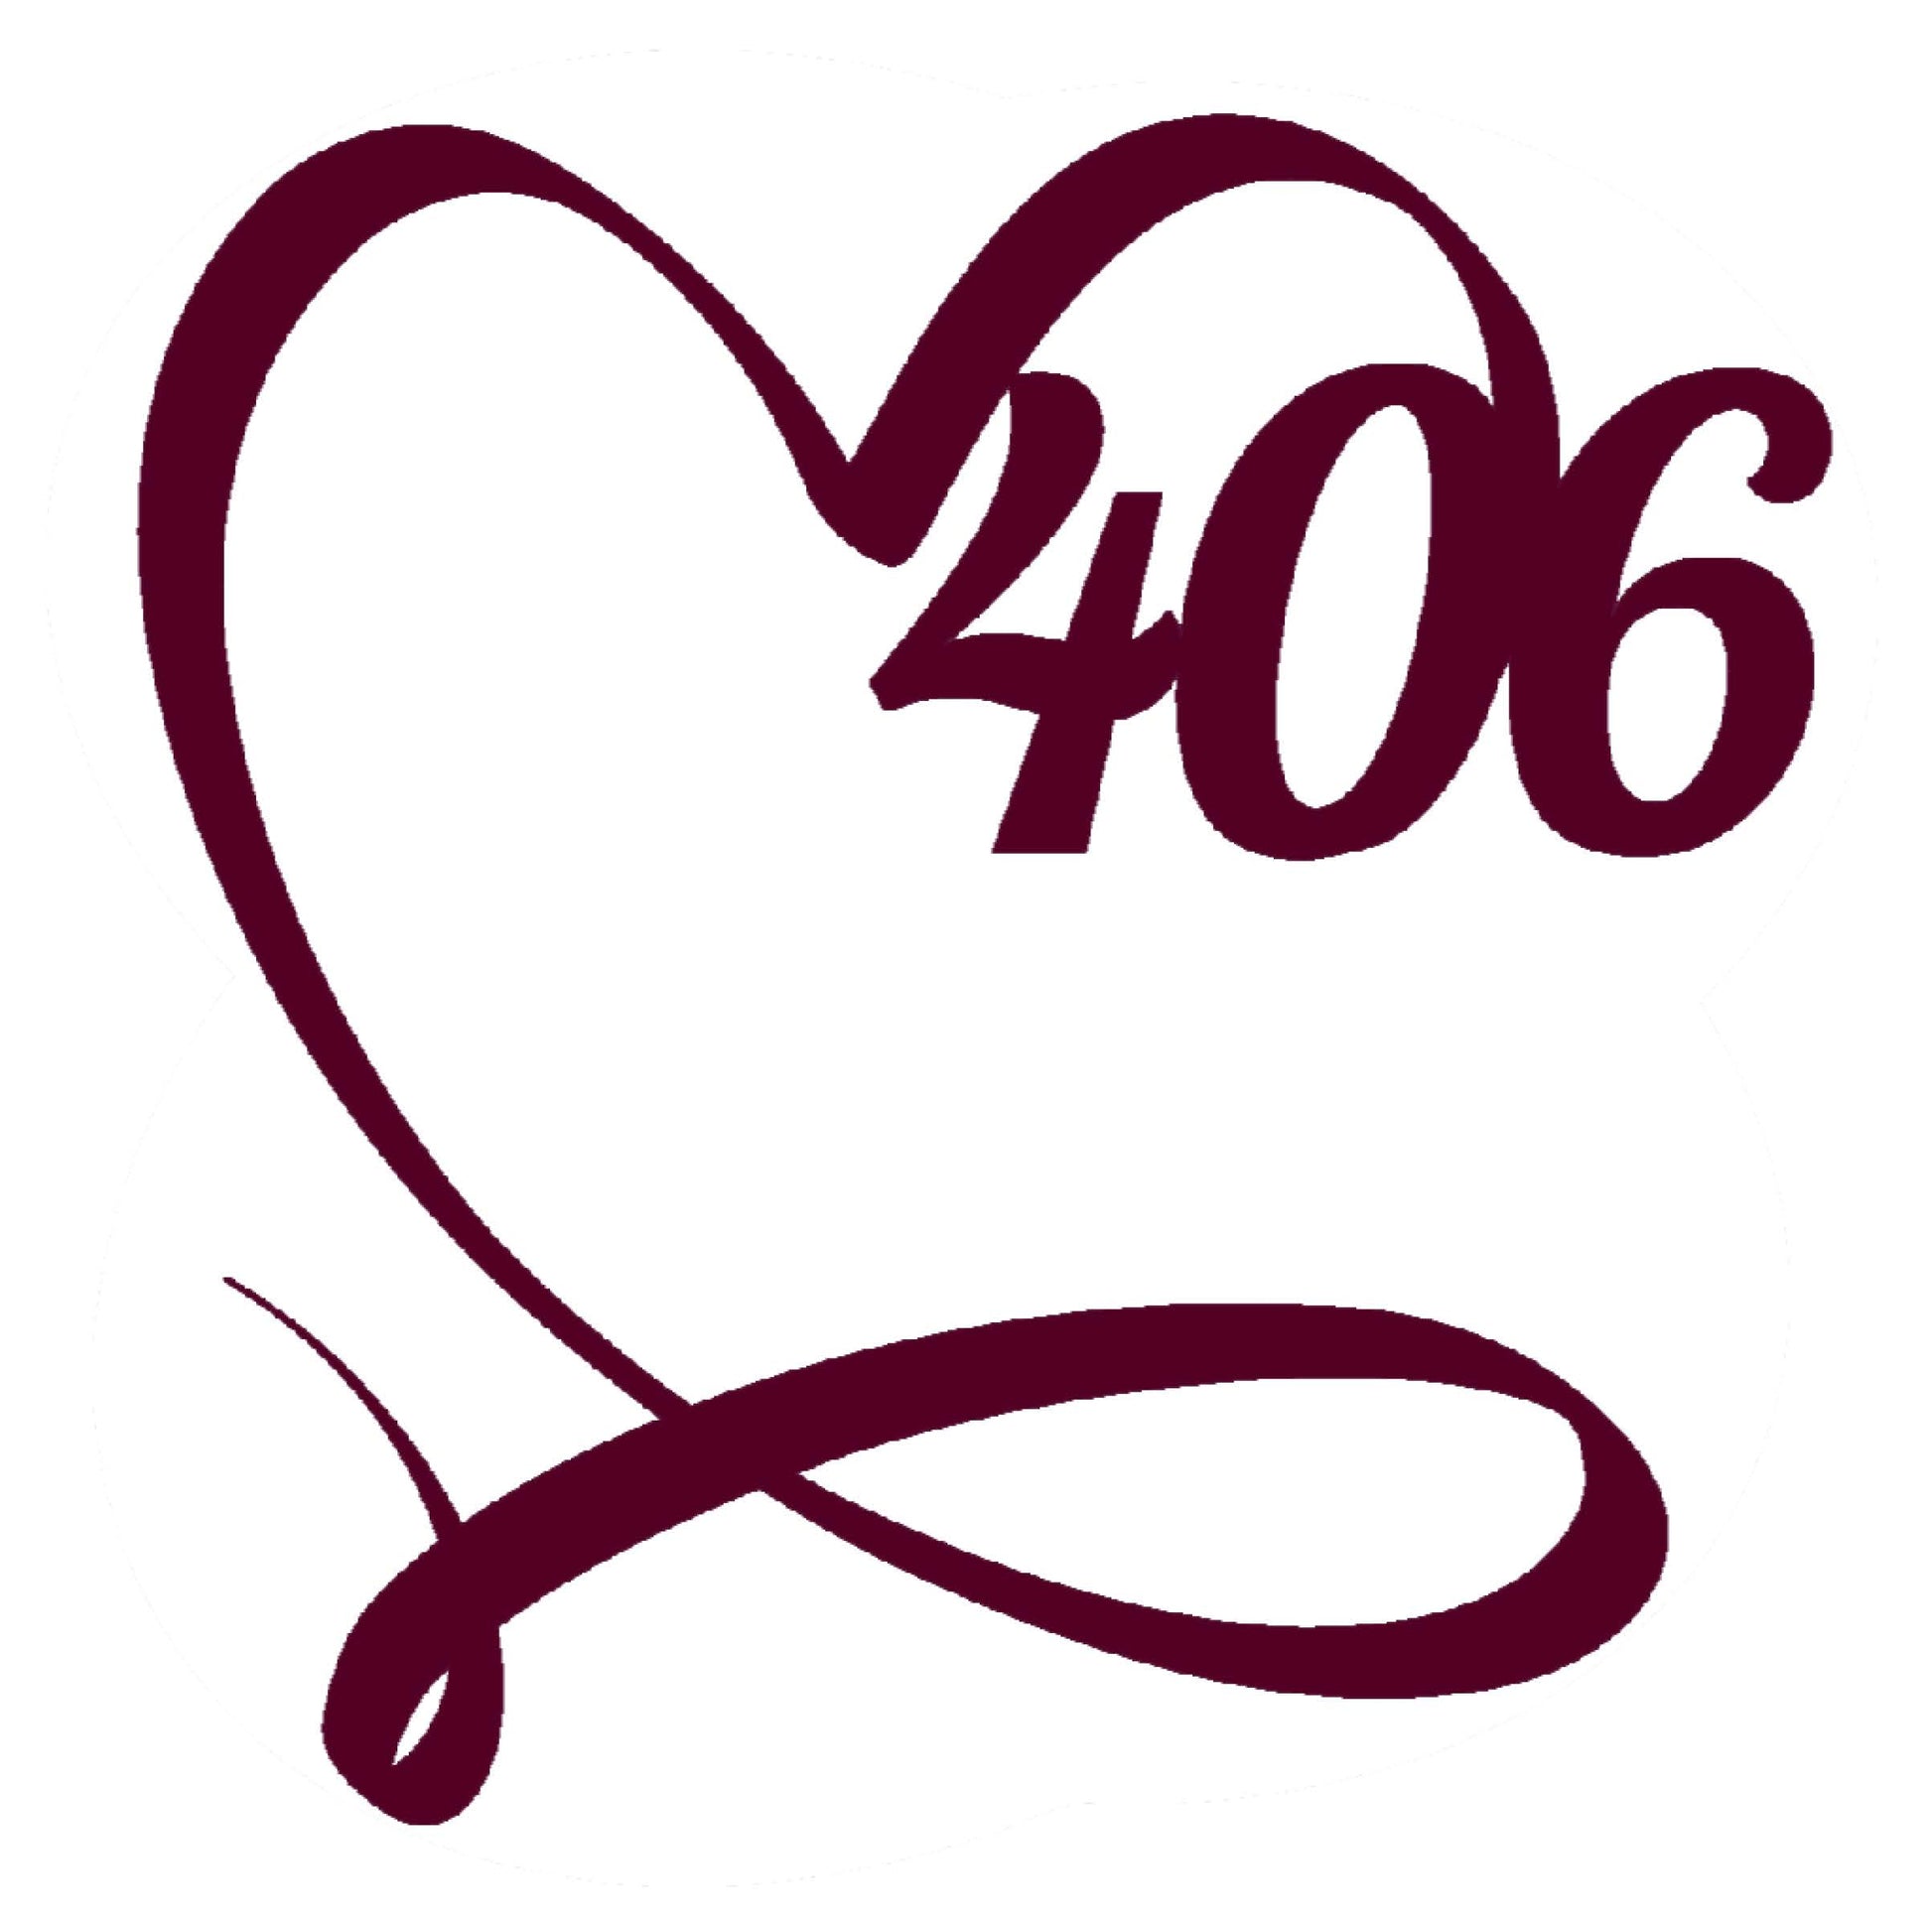 Image of the 406 Love Sticker, featuring the iconic '406 Love' design, ideal for adding a touch of Montana pride to your belongings.